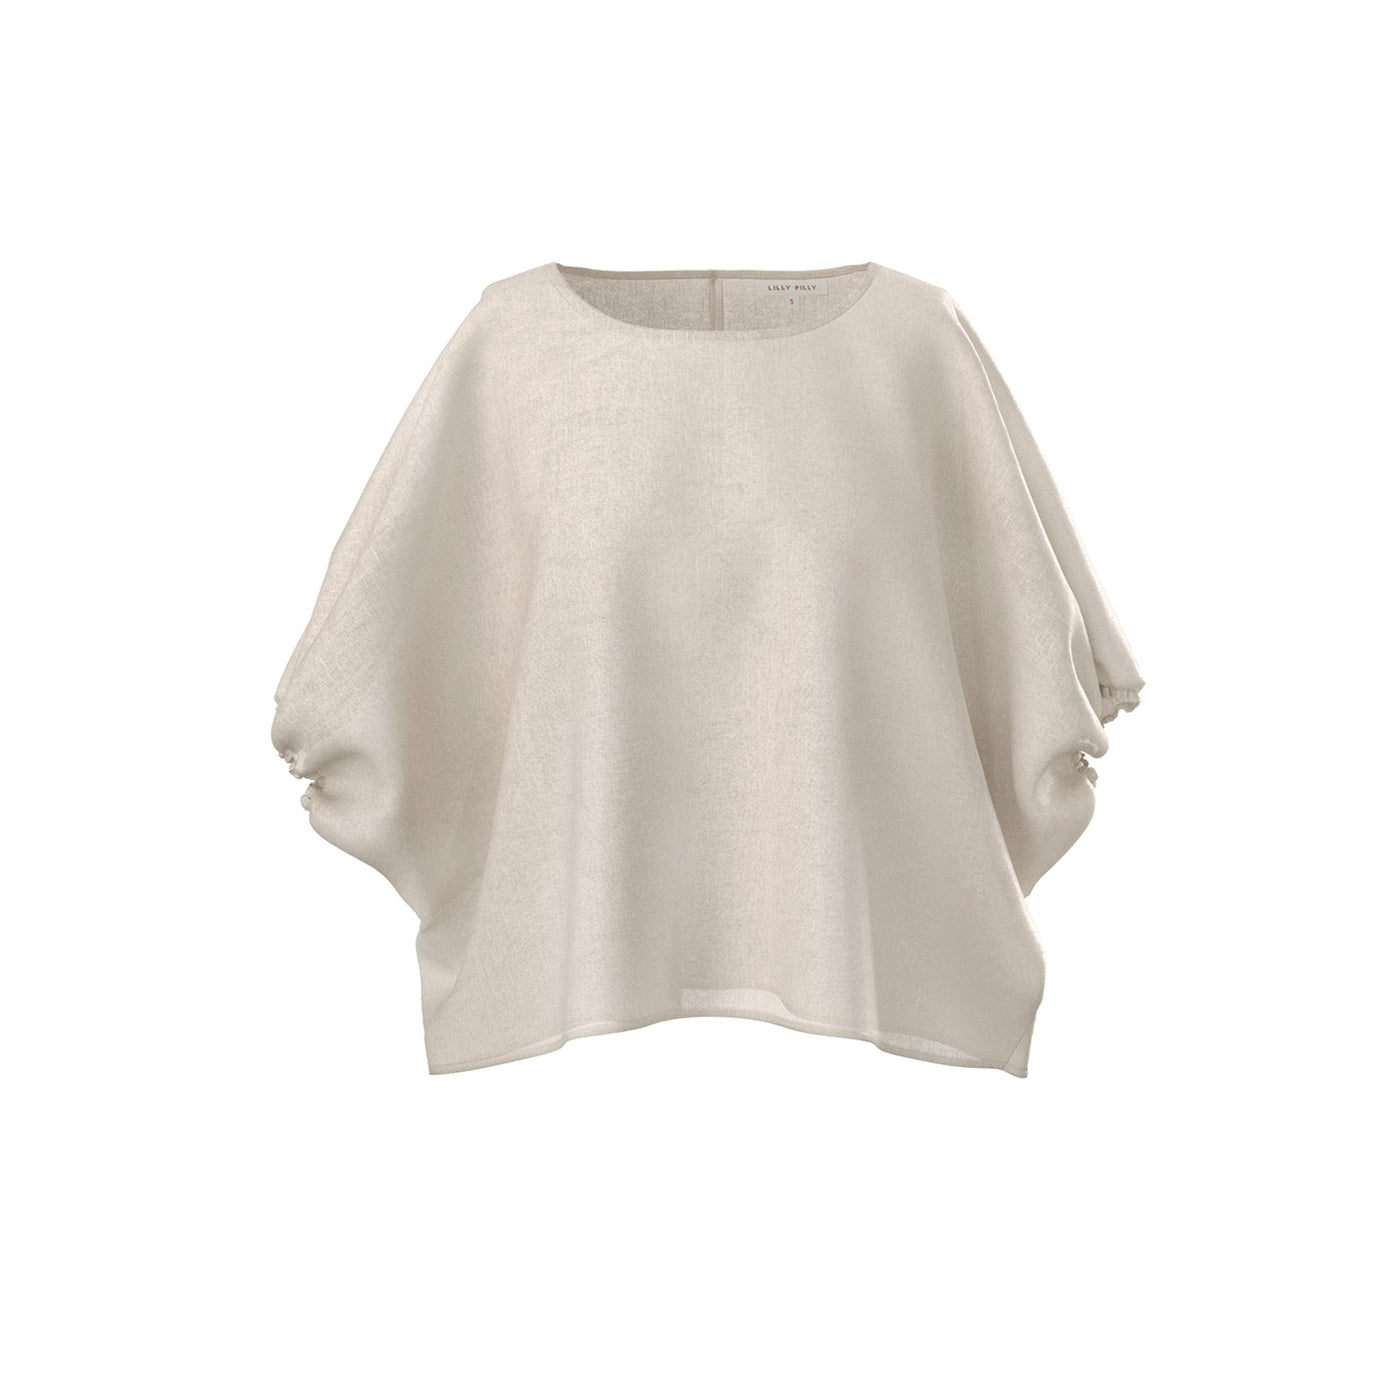 Lilly Pilly Collection Tina top made from 100% Organic linen in Oatmeal, as 3D model showing front view